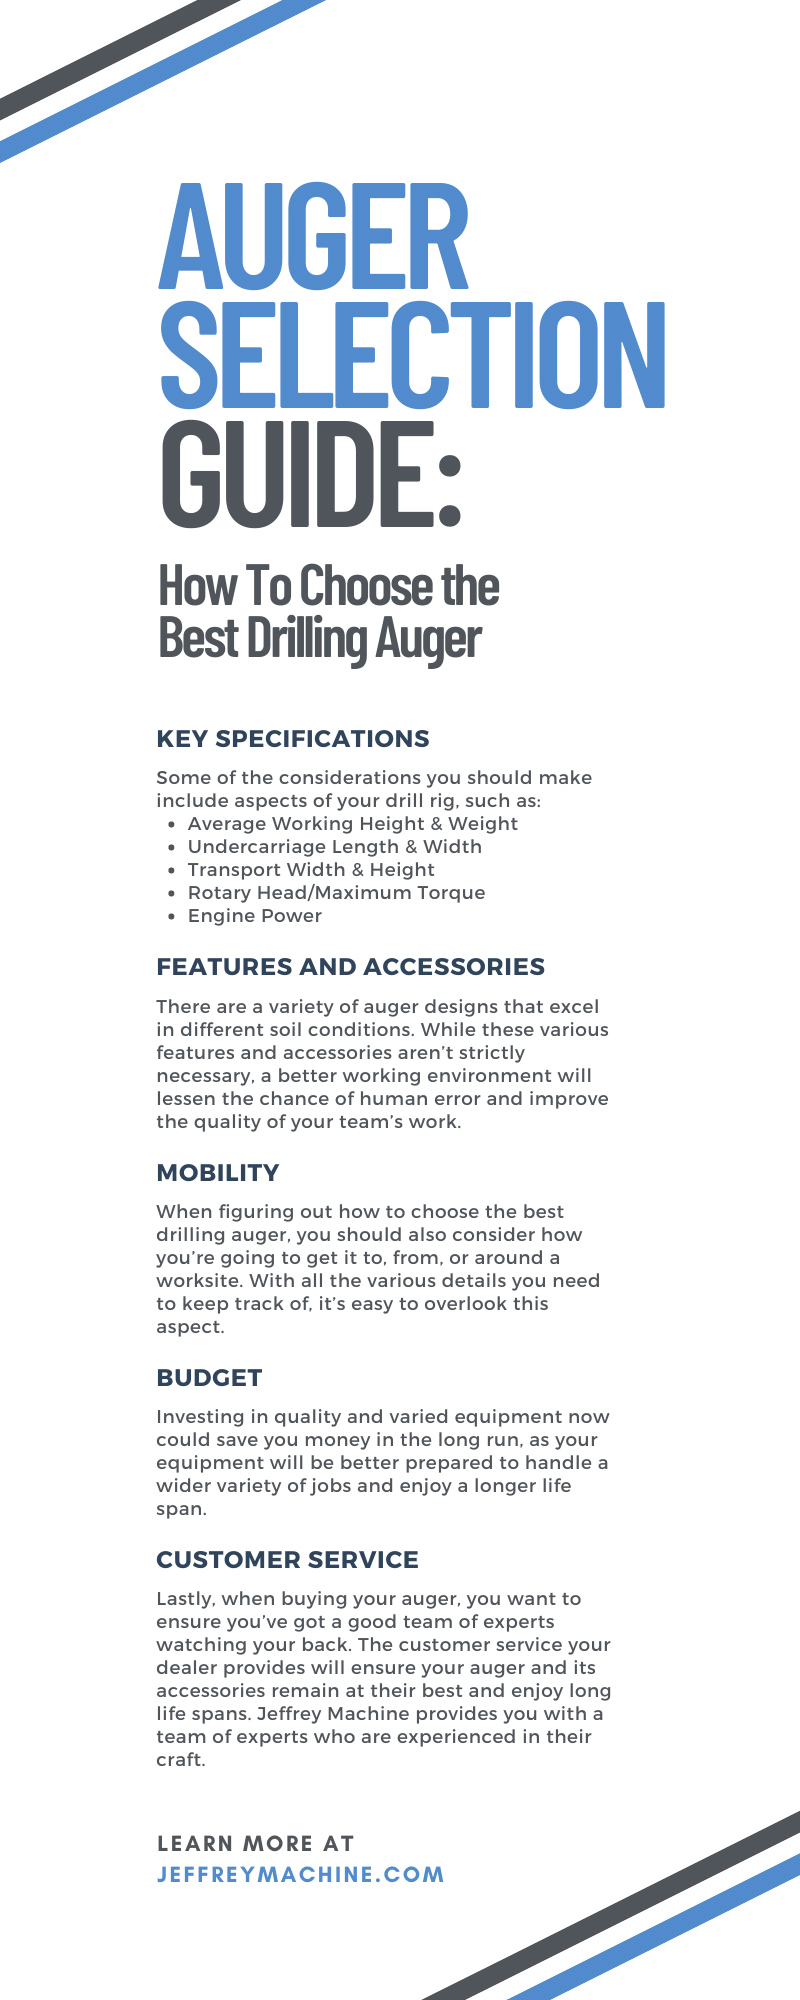 Auger Selection Guide: How To Choose the Best Drilling Auger